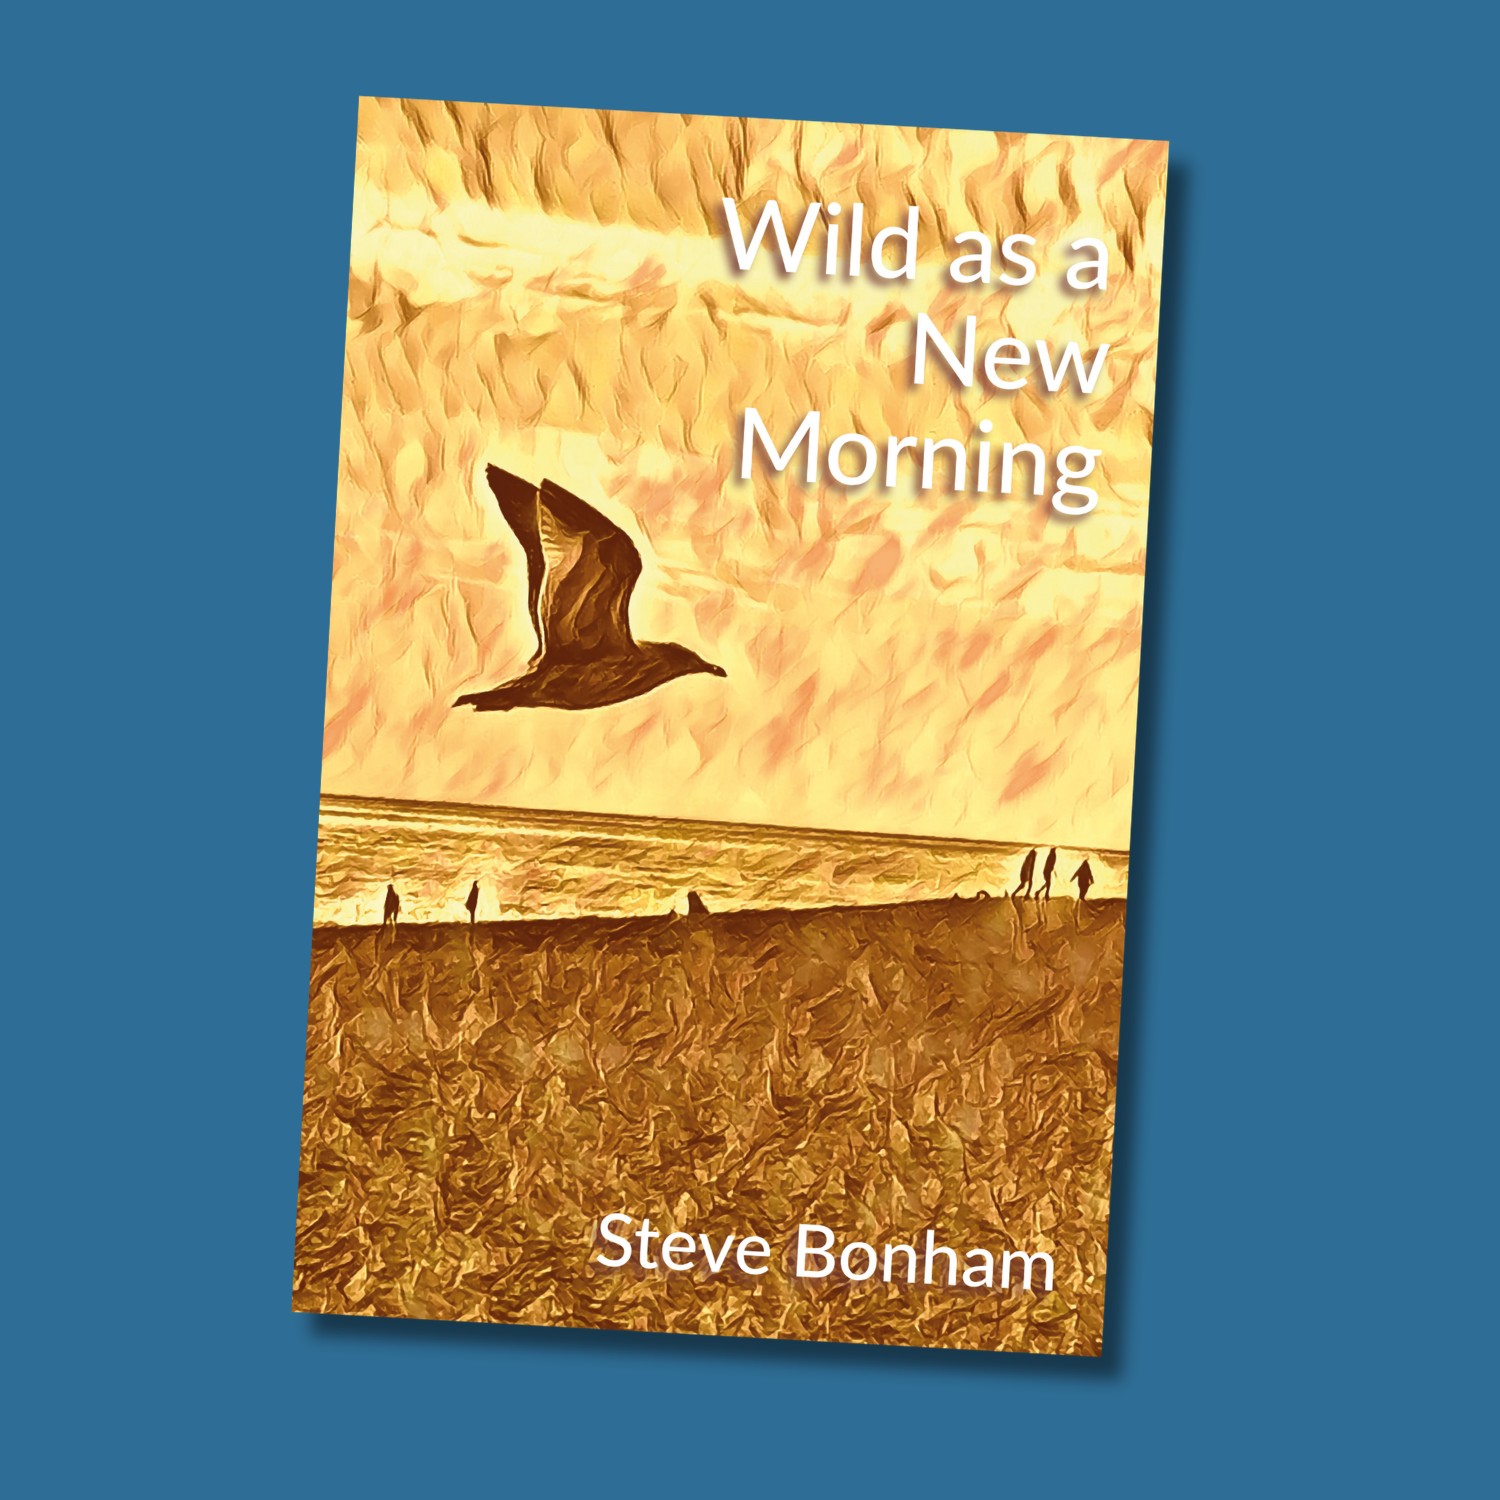 Wild as a New Morning (paperback)